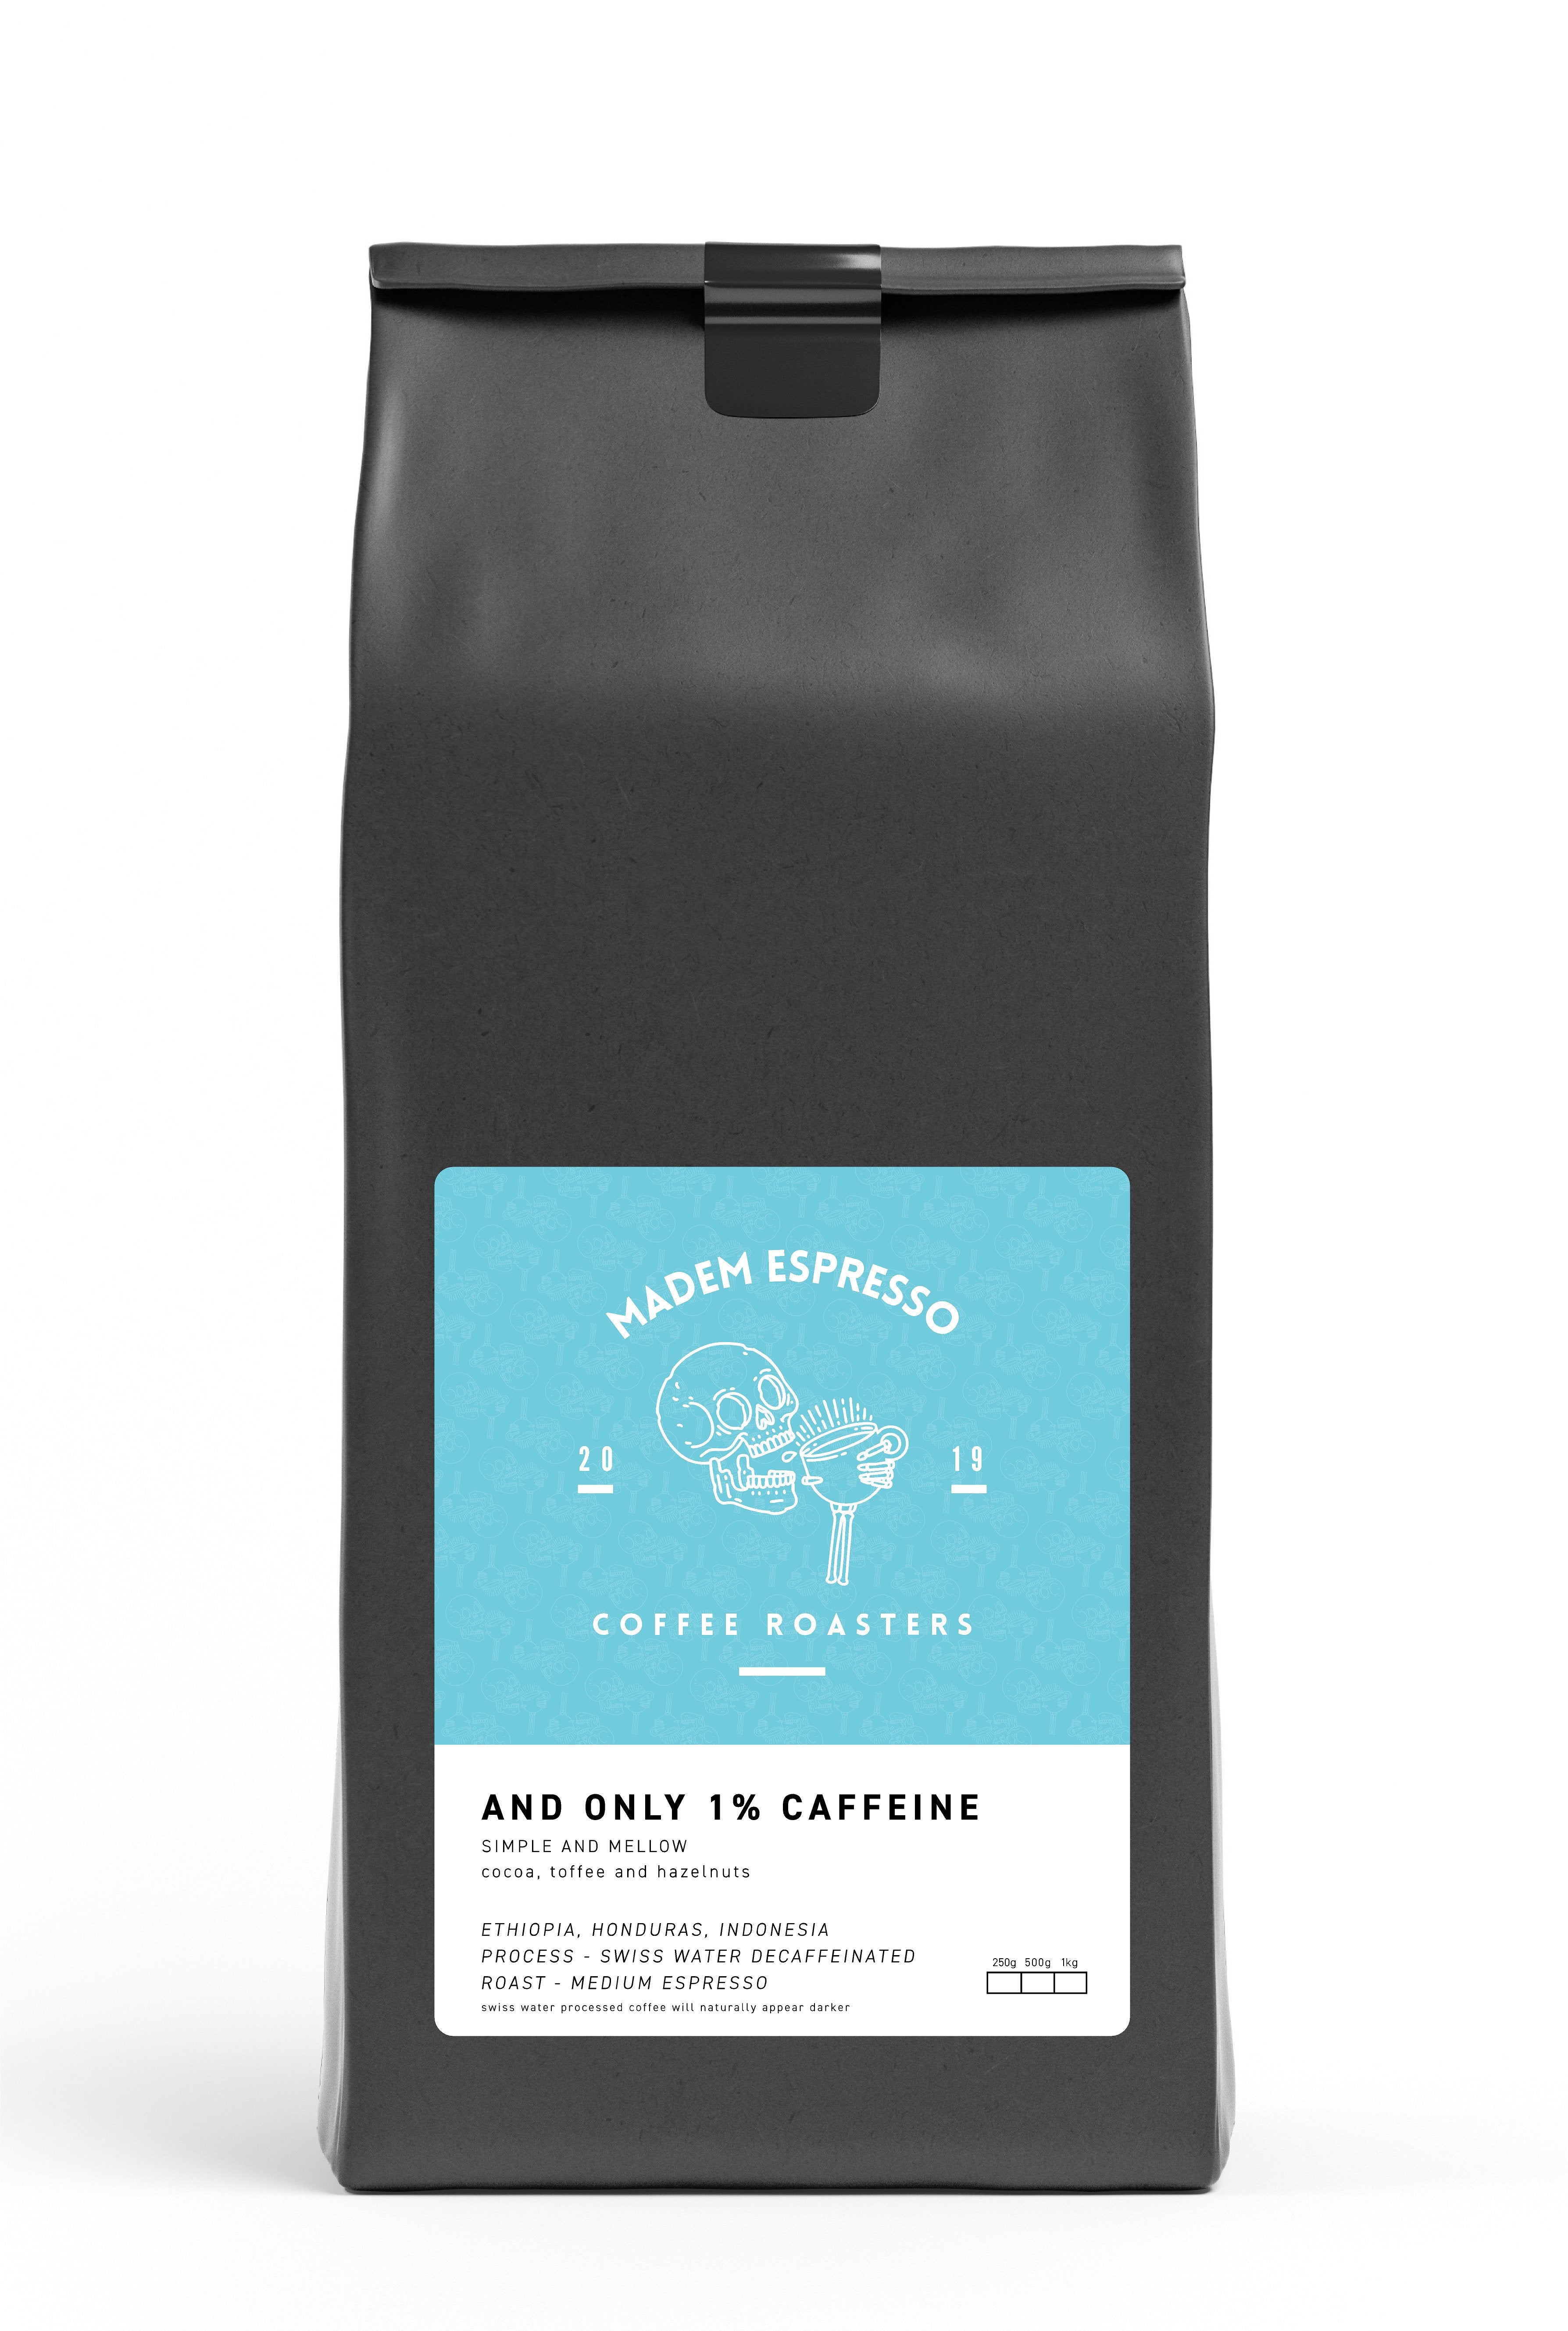 And only 1% caffeine (SWP Espresso Decaf Blend)